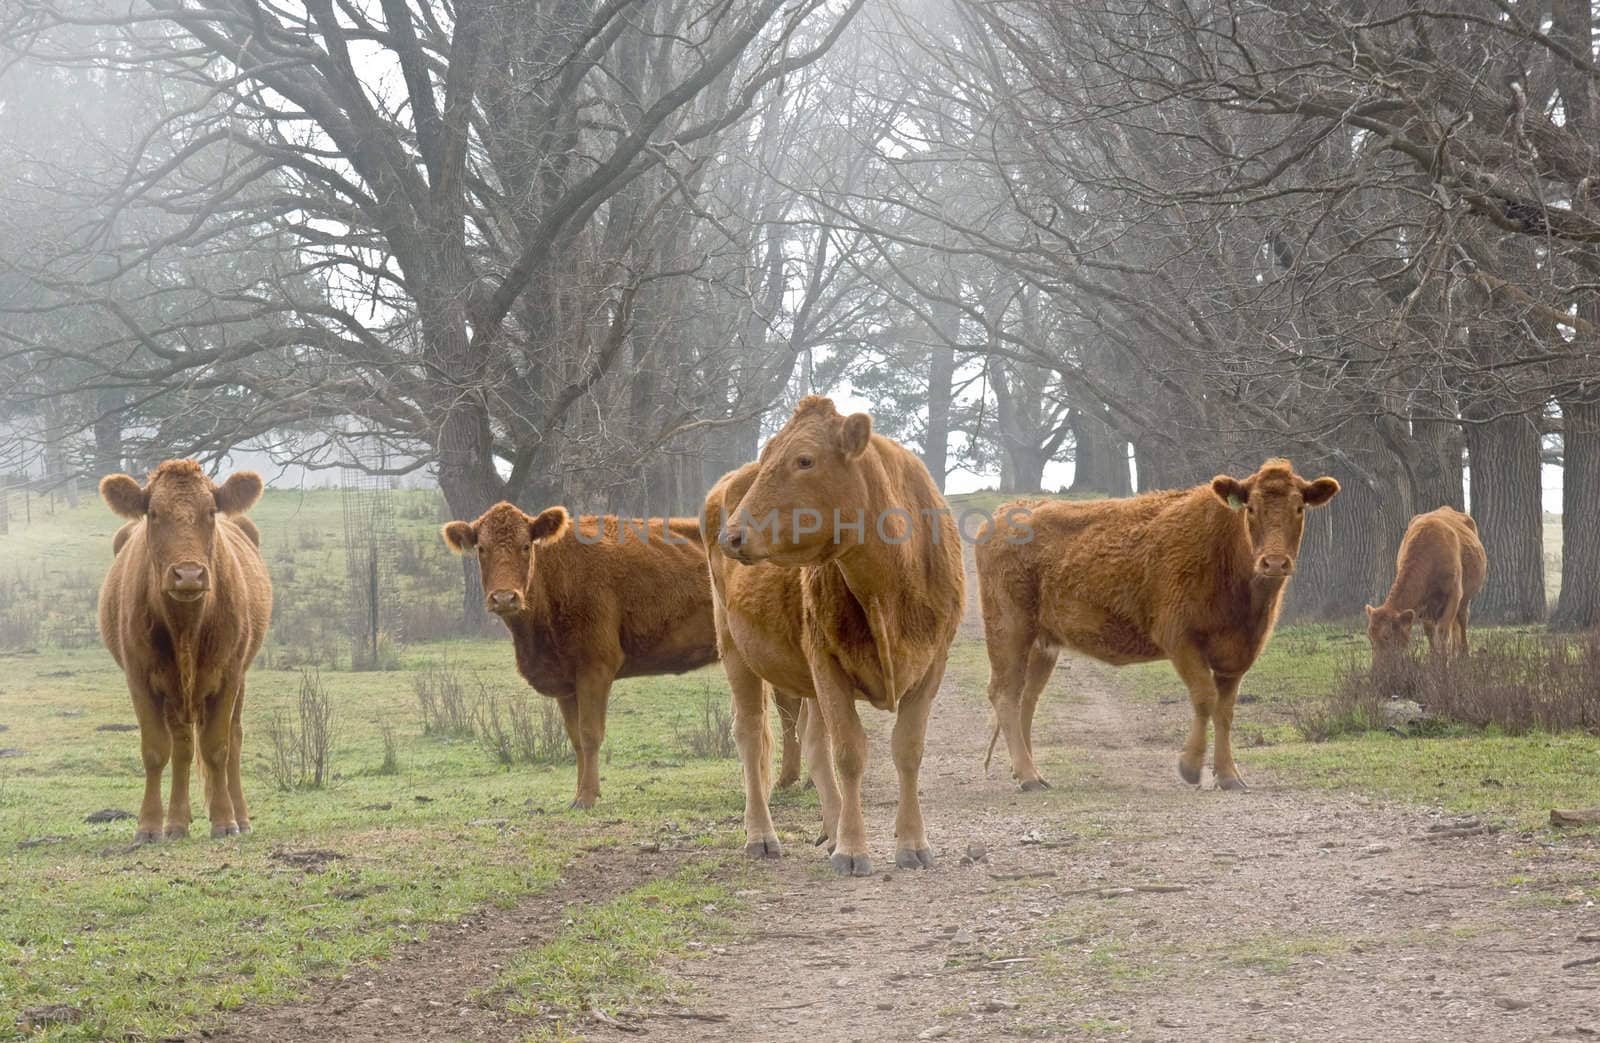 cows on the road by clearviewstock